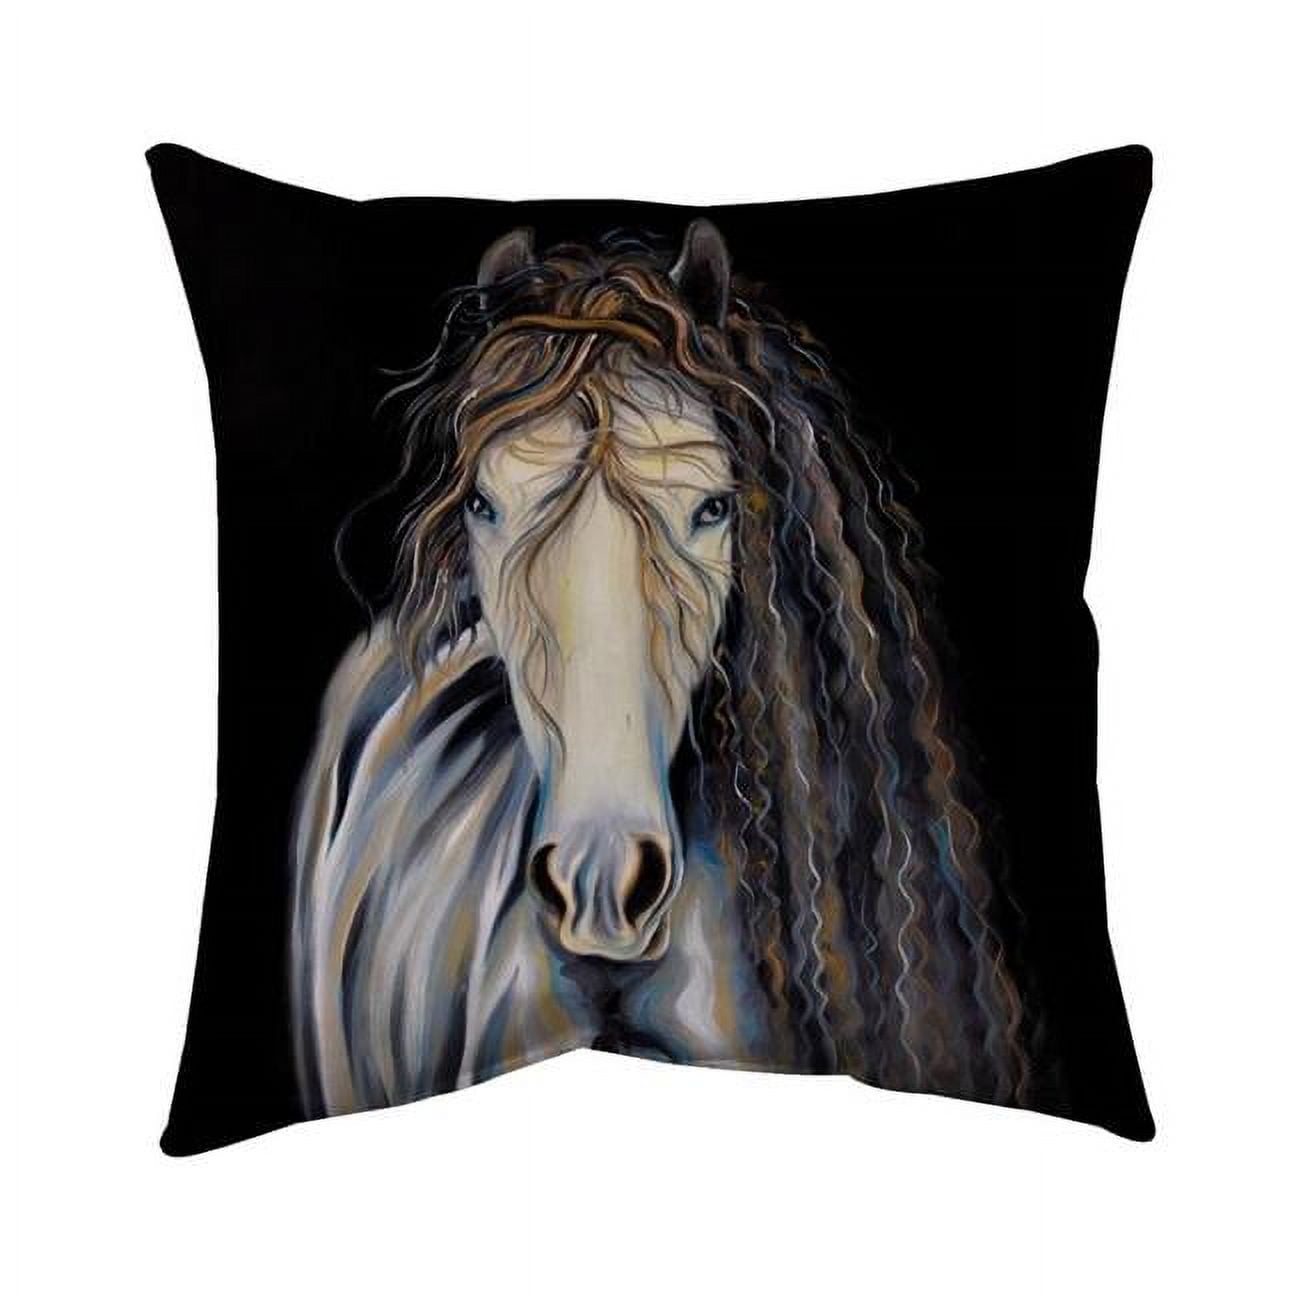 Begin Home Decor 5542-1616-AN220 16 x 16 in. Abstract Horse with Curly Mane-Double Sided Print Outdoor Pillow Cover